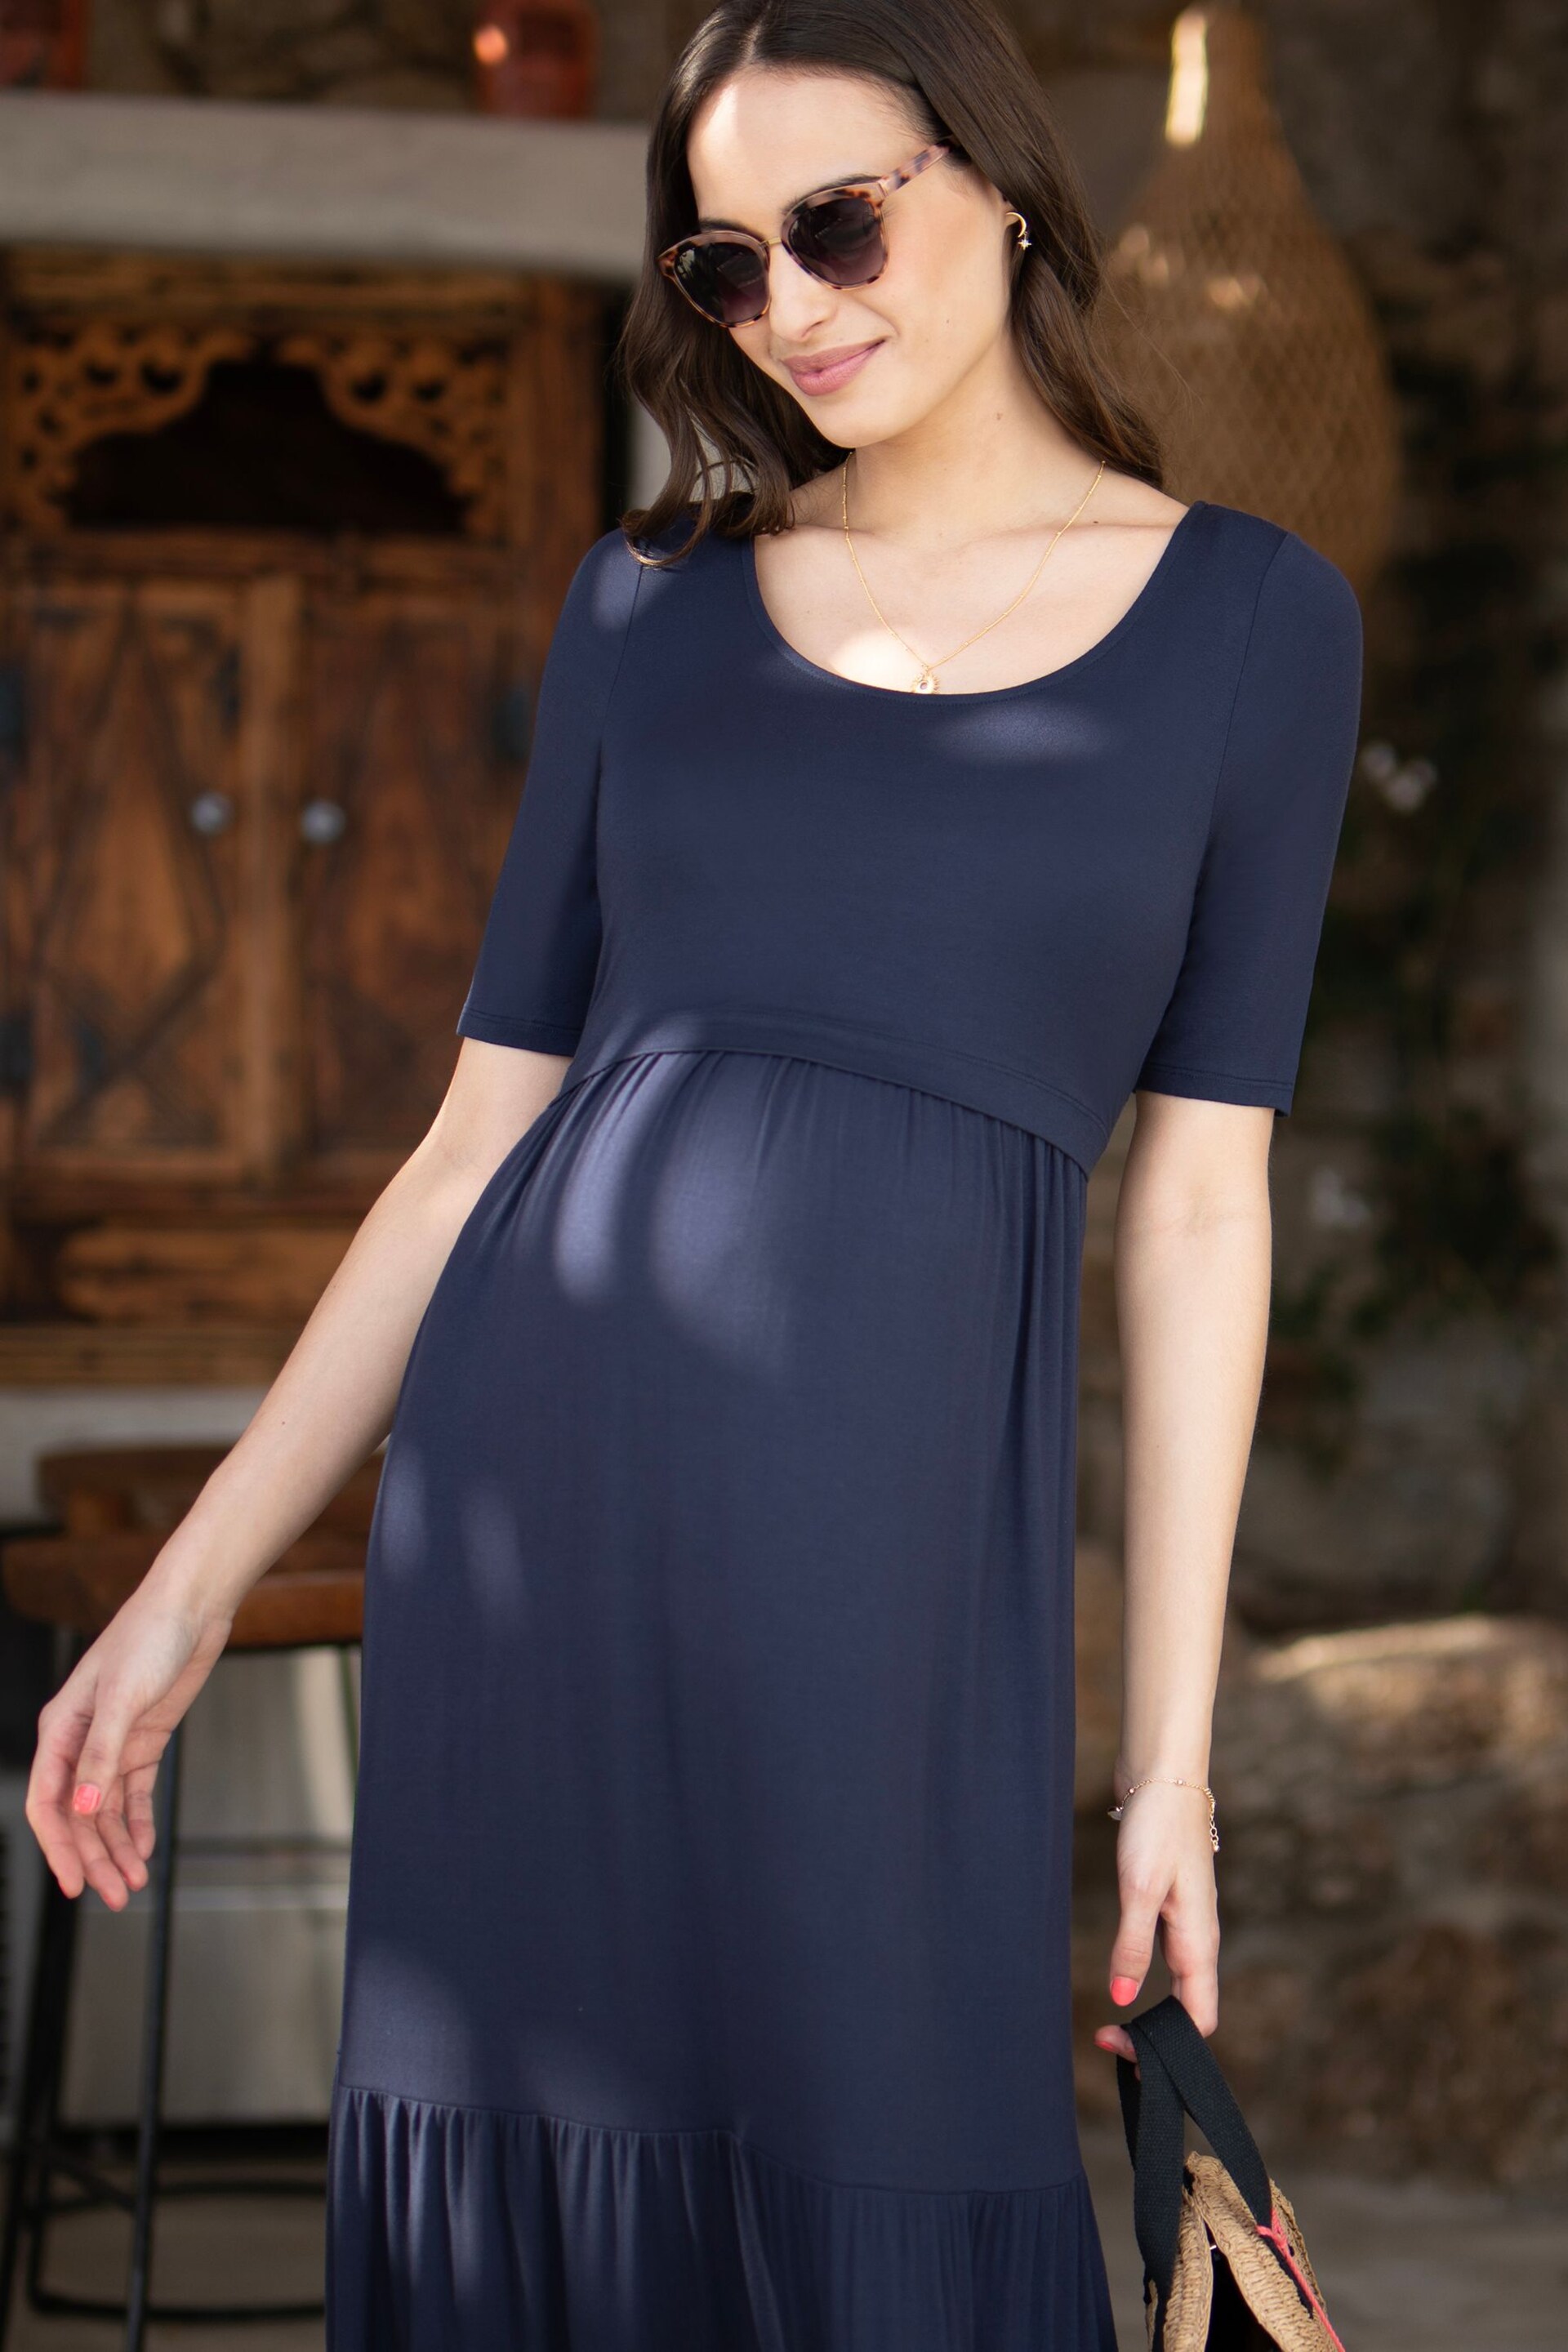 Seraphine Blue Tiered Maxi Dress With Nursing Access - Image 3 of 6